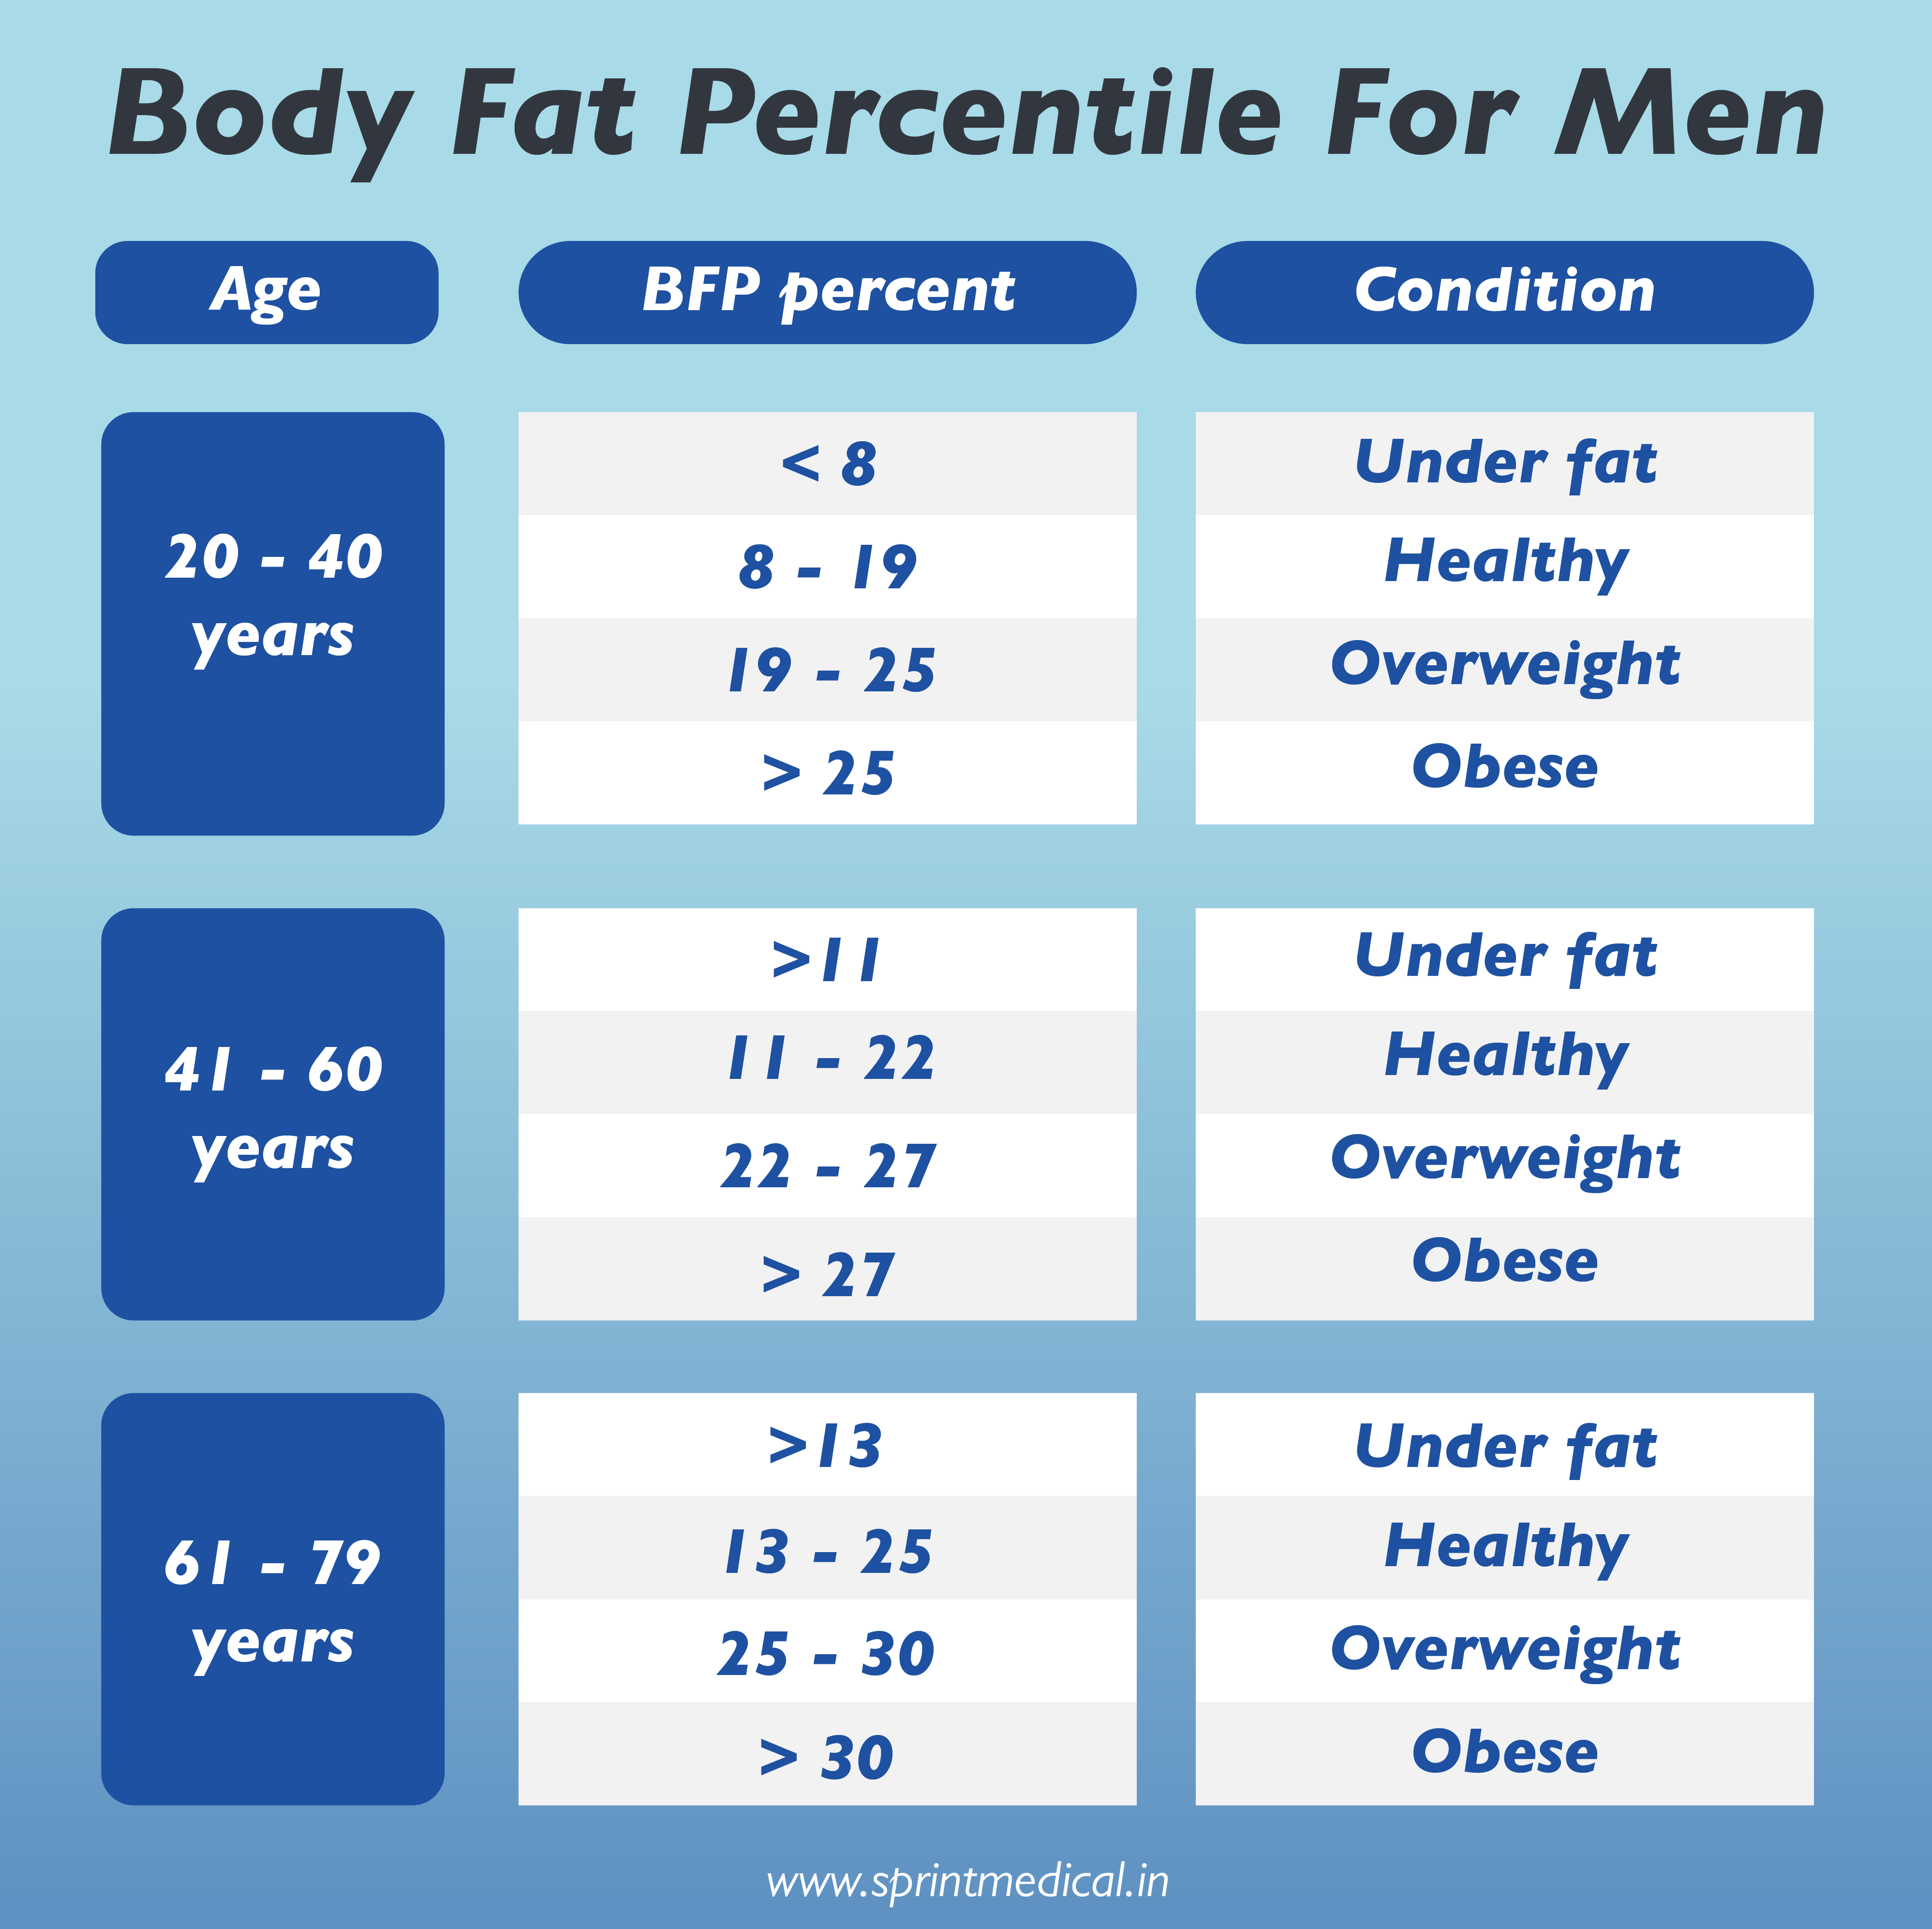 Are You Overweight, Obese or Normal Weight for Your Height?